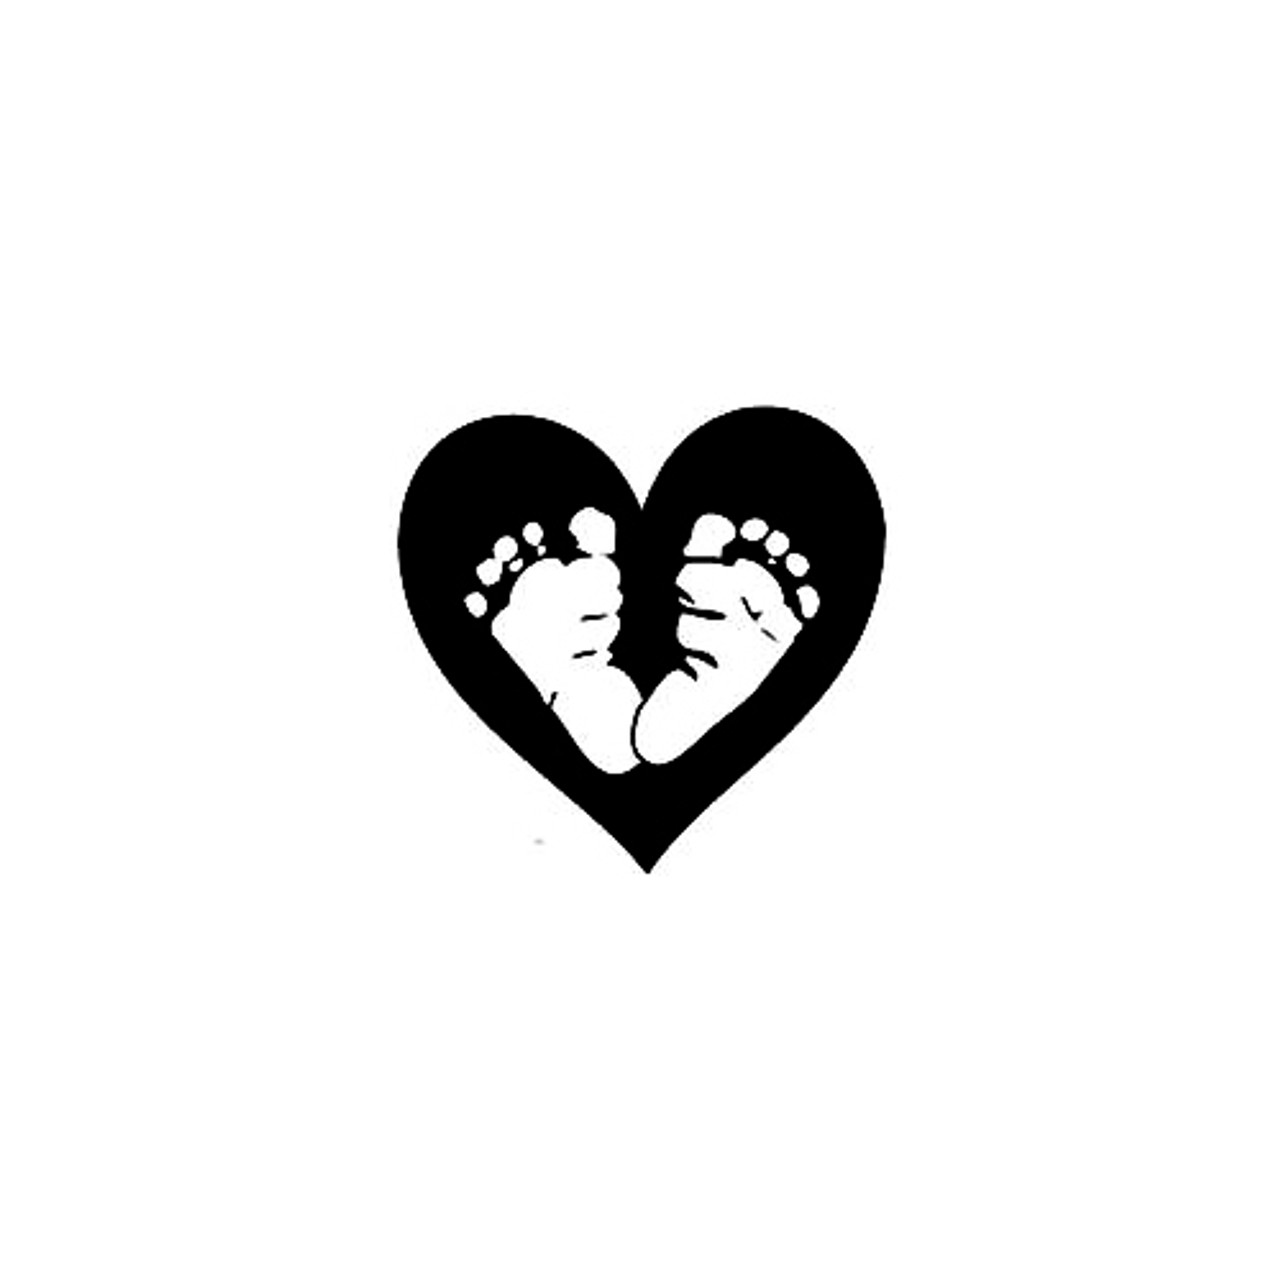 Download 191+ Baby Feet With Heart Svg Free DXF Include